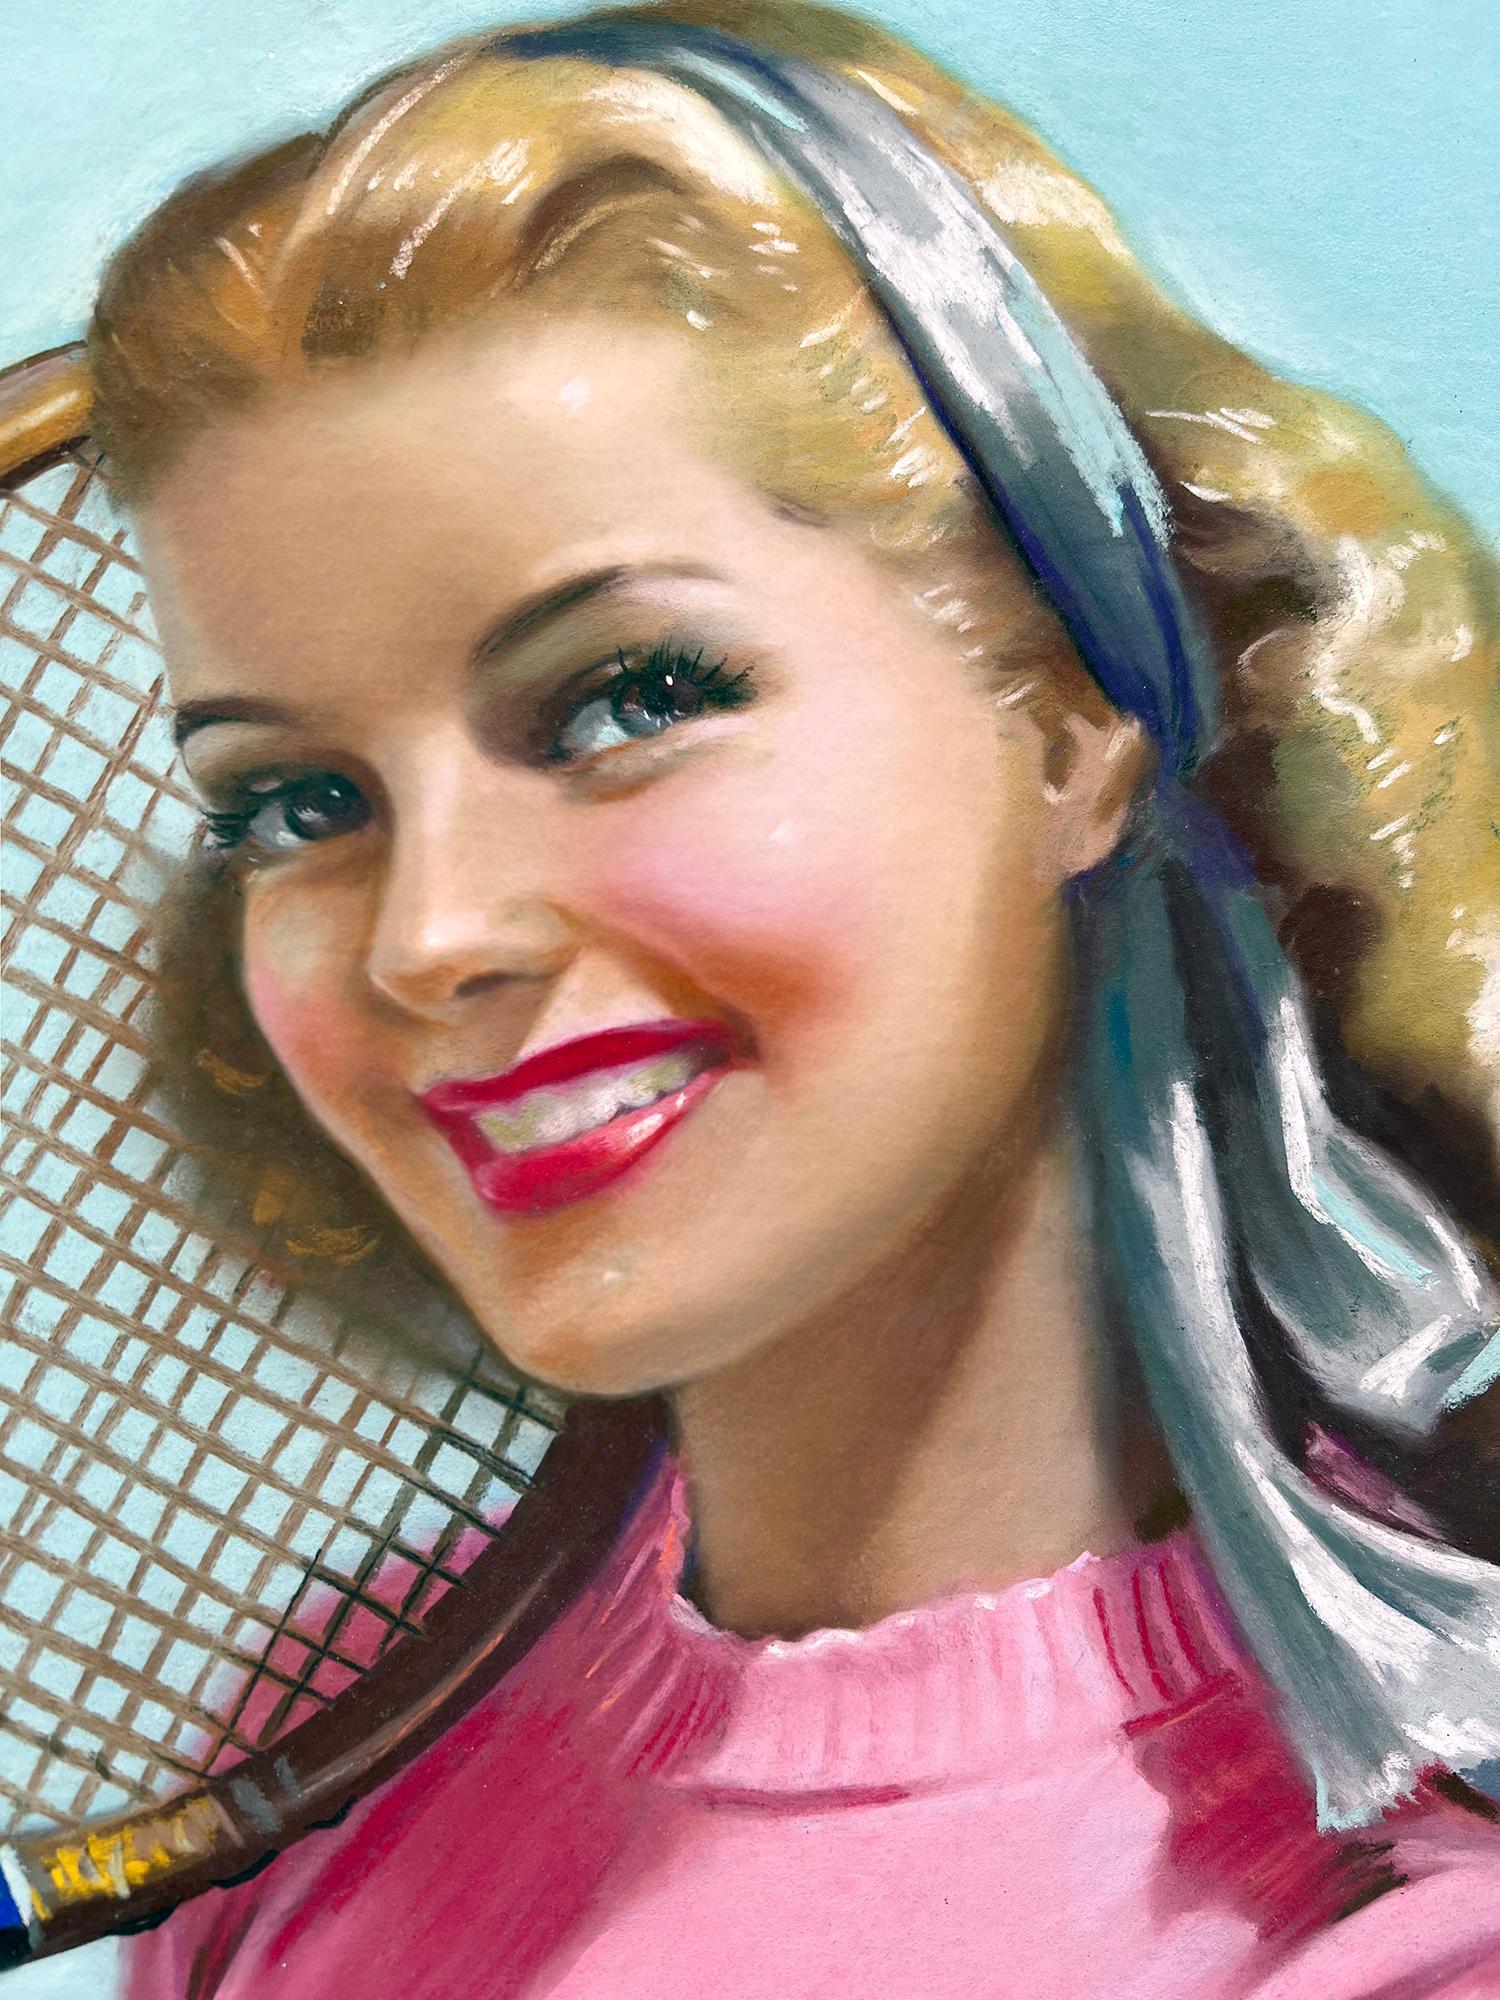 Blond Pin up with Perfect Smile Tennis Racket - Women Illustrators - Painting by Elsie Julia Miller